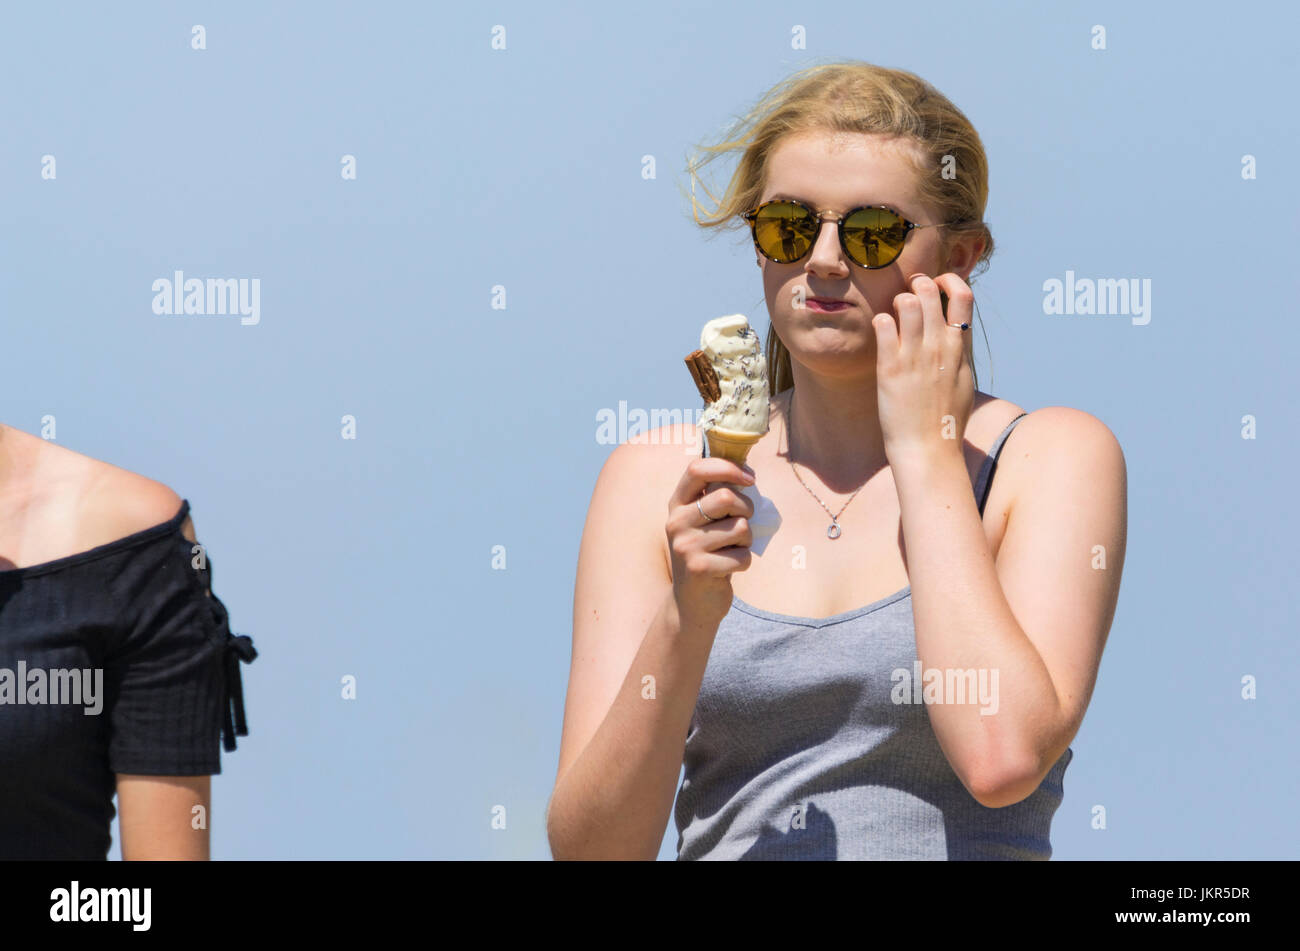 Young woman eating an ice cream cone on a hot day in Summer. Stock Photo